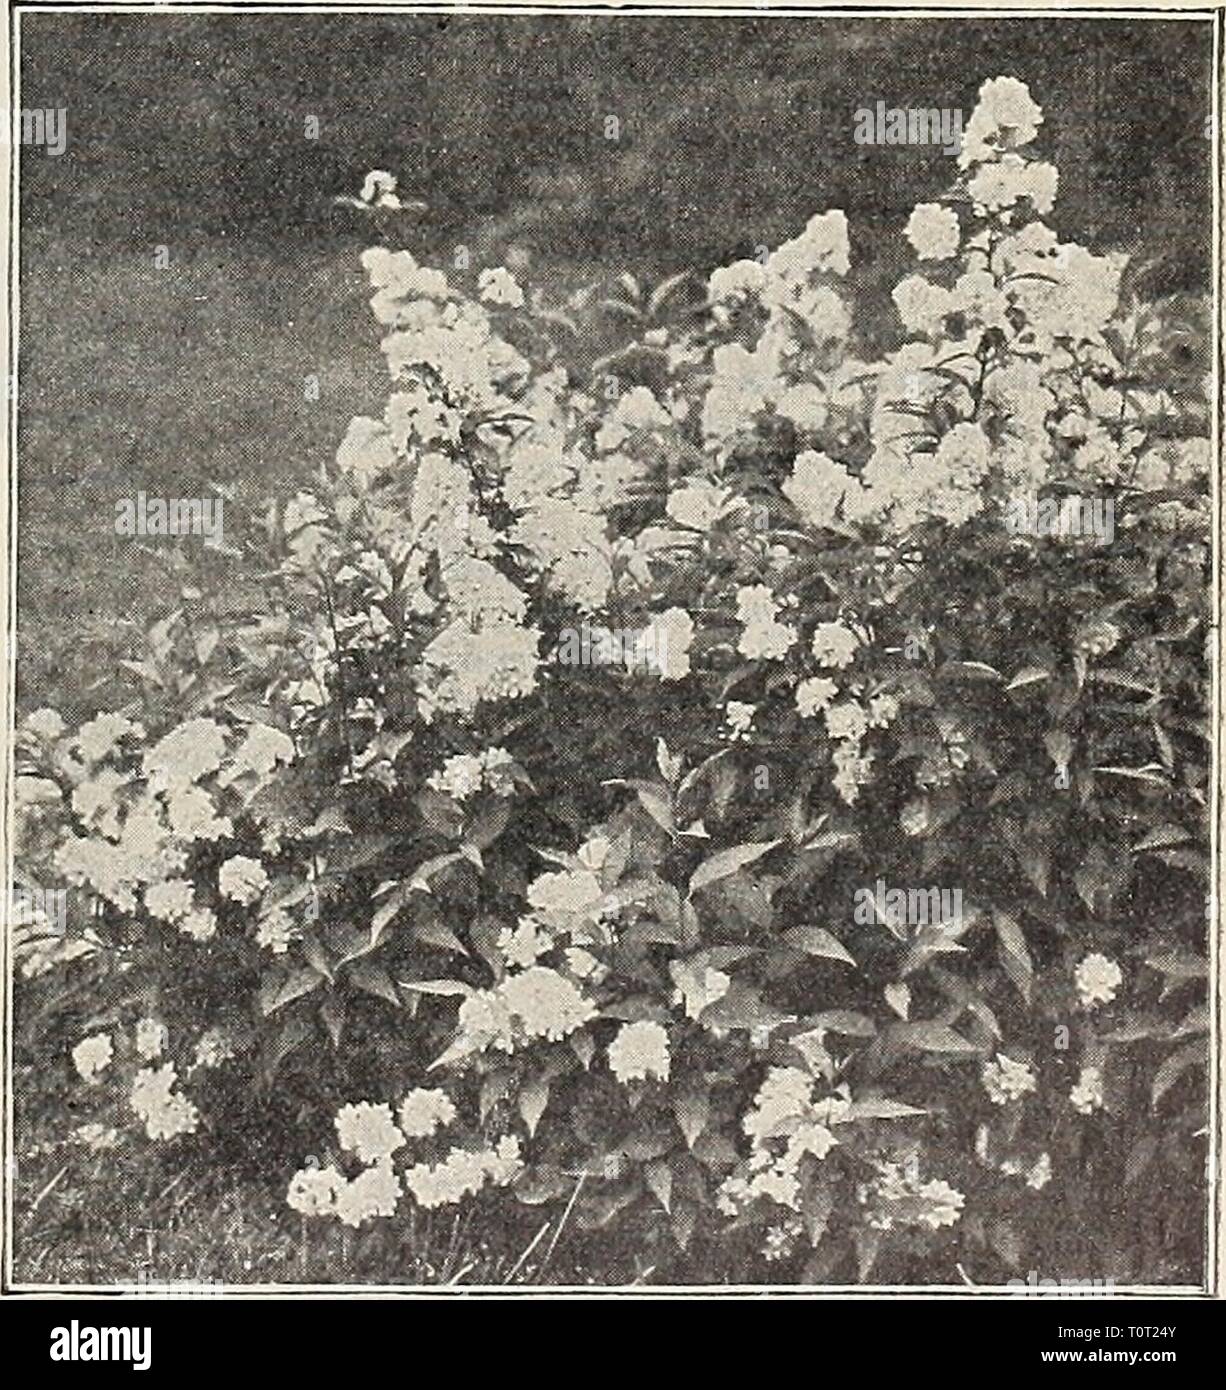 Dreer's garden book  1906 Dreer's garden book : 1906  dreersgardenbook1906henr Year: 1906  • V HvDKANGKA PaNICULATA GraNDIFLORA. Deutzia Candidissima plena. A fine double white. — Crenata rosea plena {DozMe-flowering Deutzta). Yo- ers double-white, linged with pink ; very desirable. — Qracilis. A dwarf bush, covered with spikes of pure white flowers in early summer. Campanulata. . new white sort, with large, open, salver-shaped flowers. Rosea. Flowers twice the size of D. gracilis and suf fused with a delicate tint of pink ; a grand, improvemeii'i. — Lemoinei. Without doubt one of the best Stock Photo